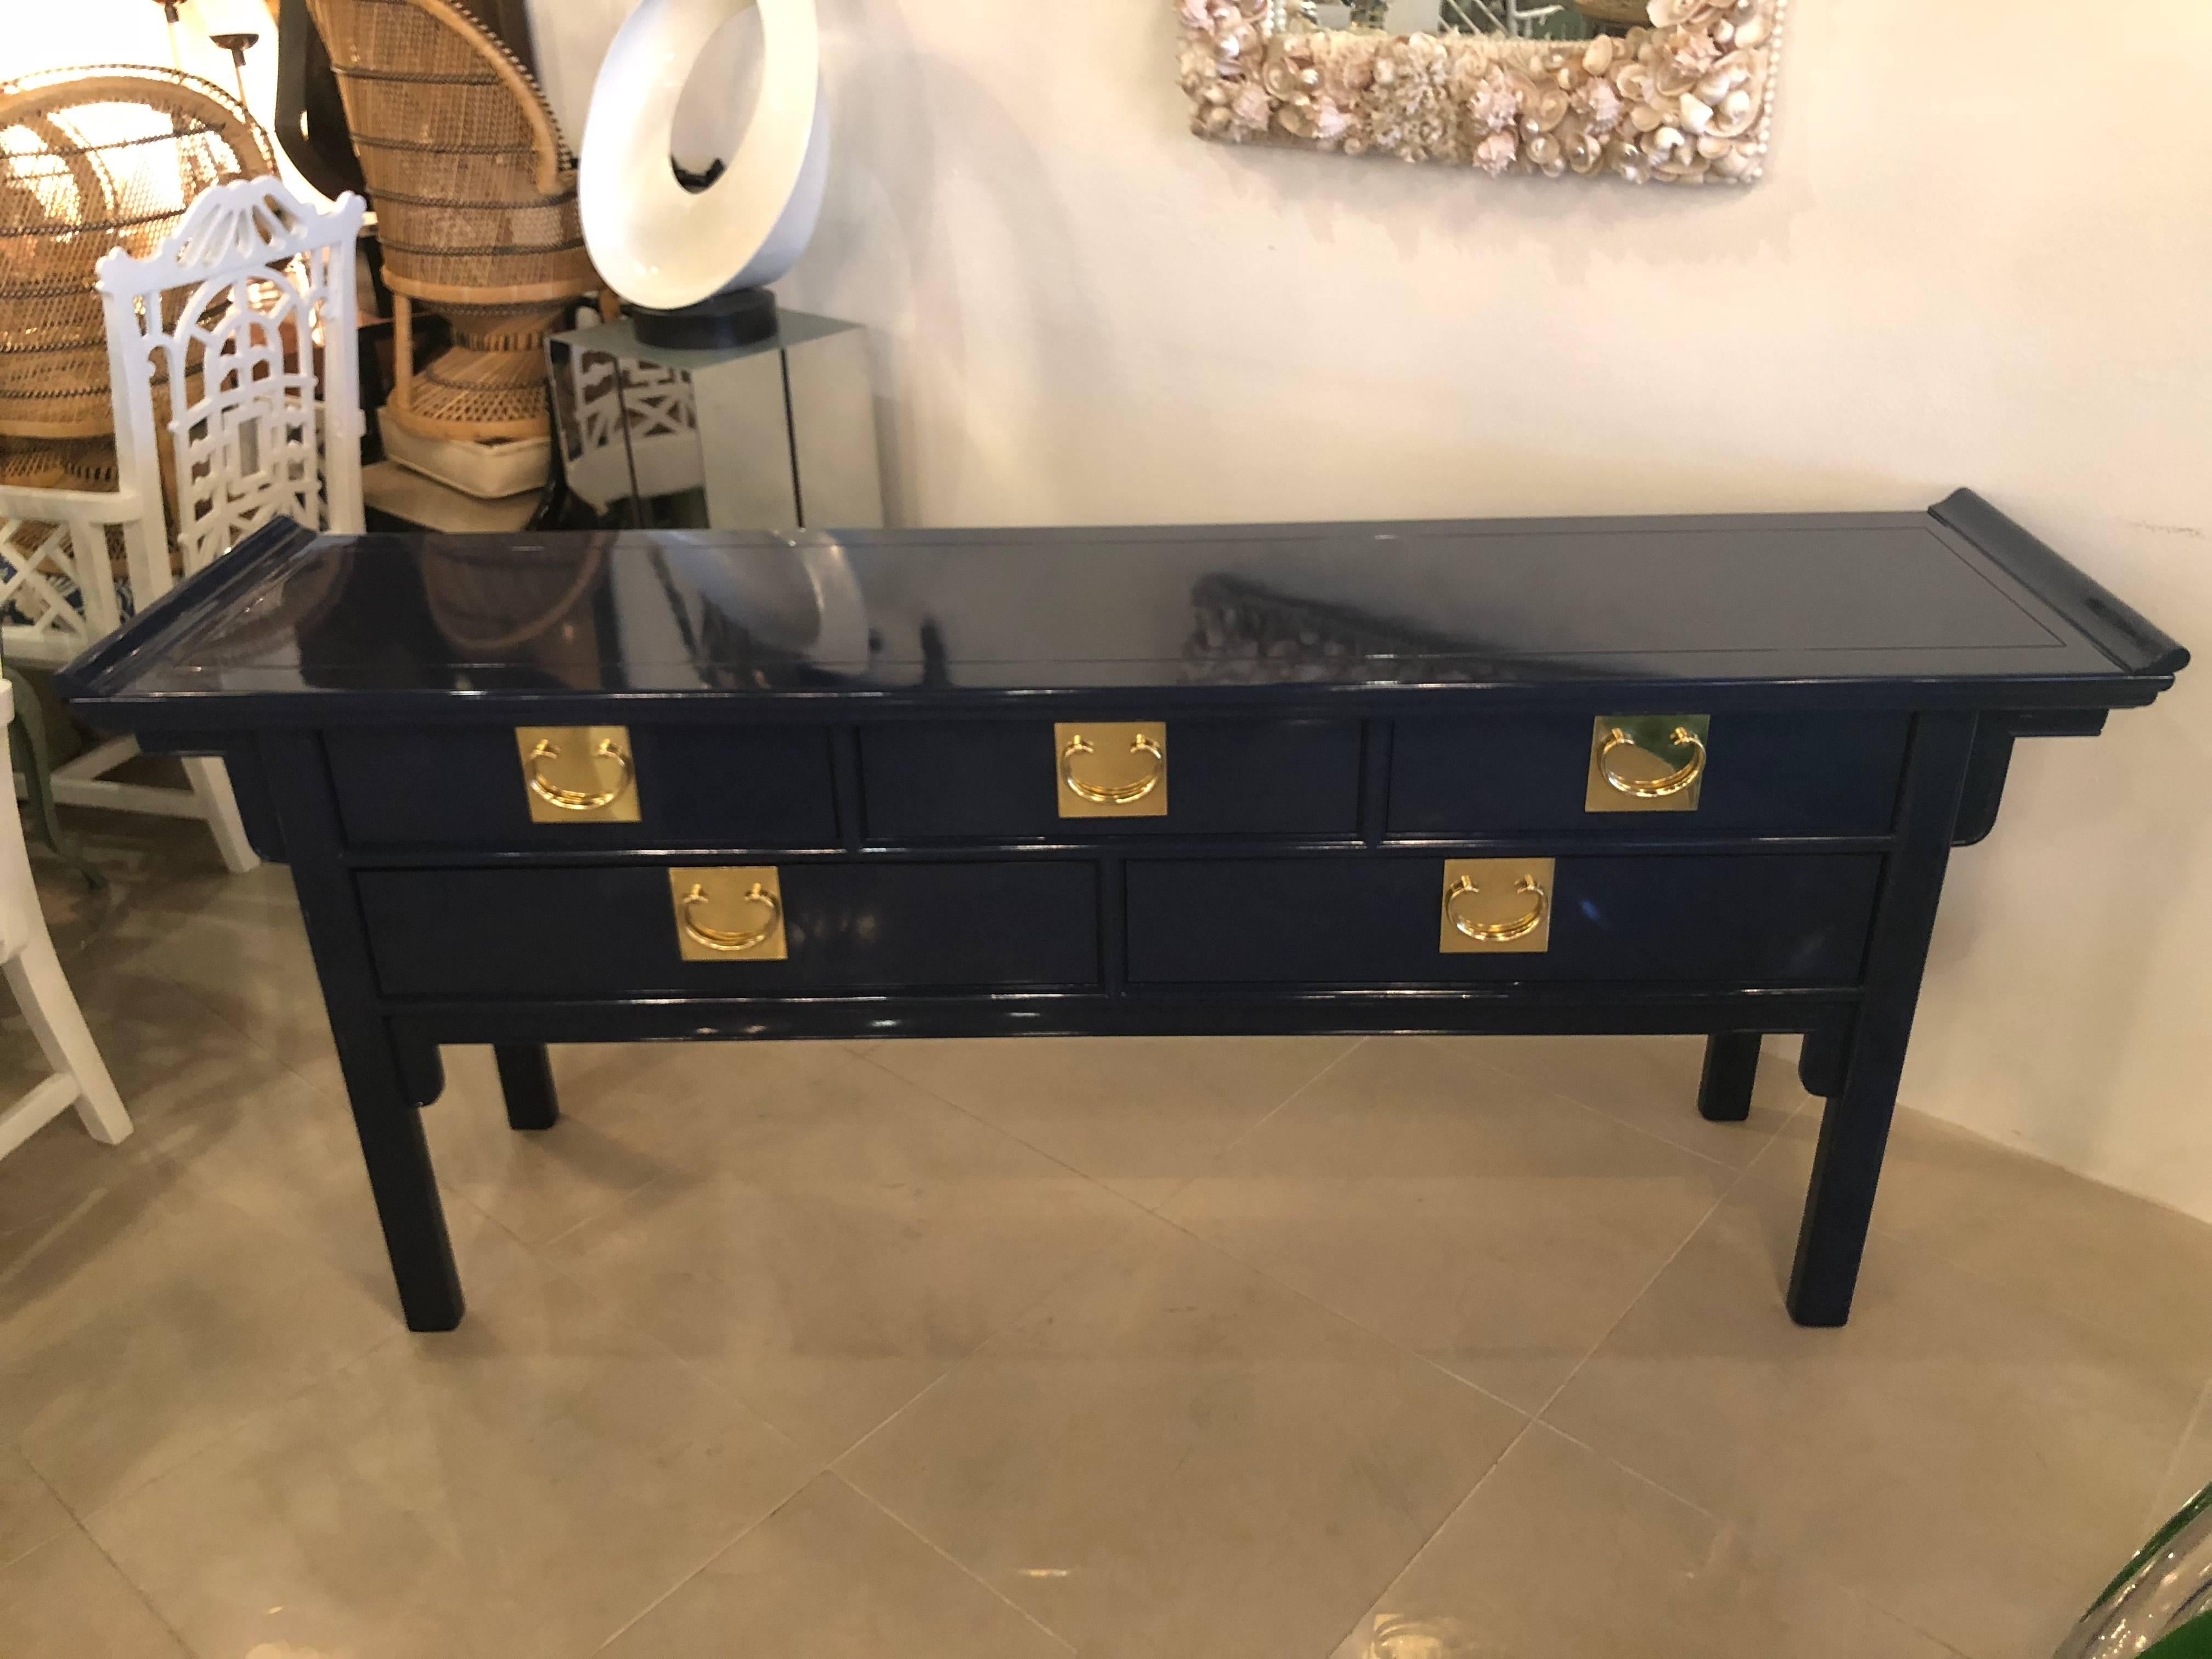 Beautiful vintage chinoiserie pagoda console table by Century Furniture. This has been completely restored. Professionally lacquered in a navy blue gloss finish, inside drawers are also done (pictured). Brass hardware has been polished.